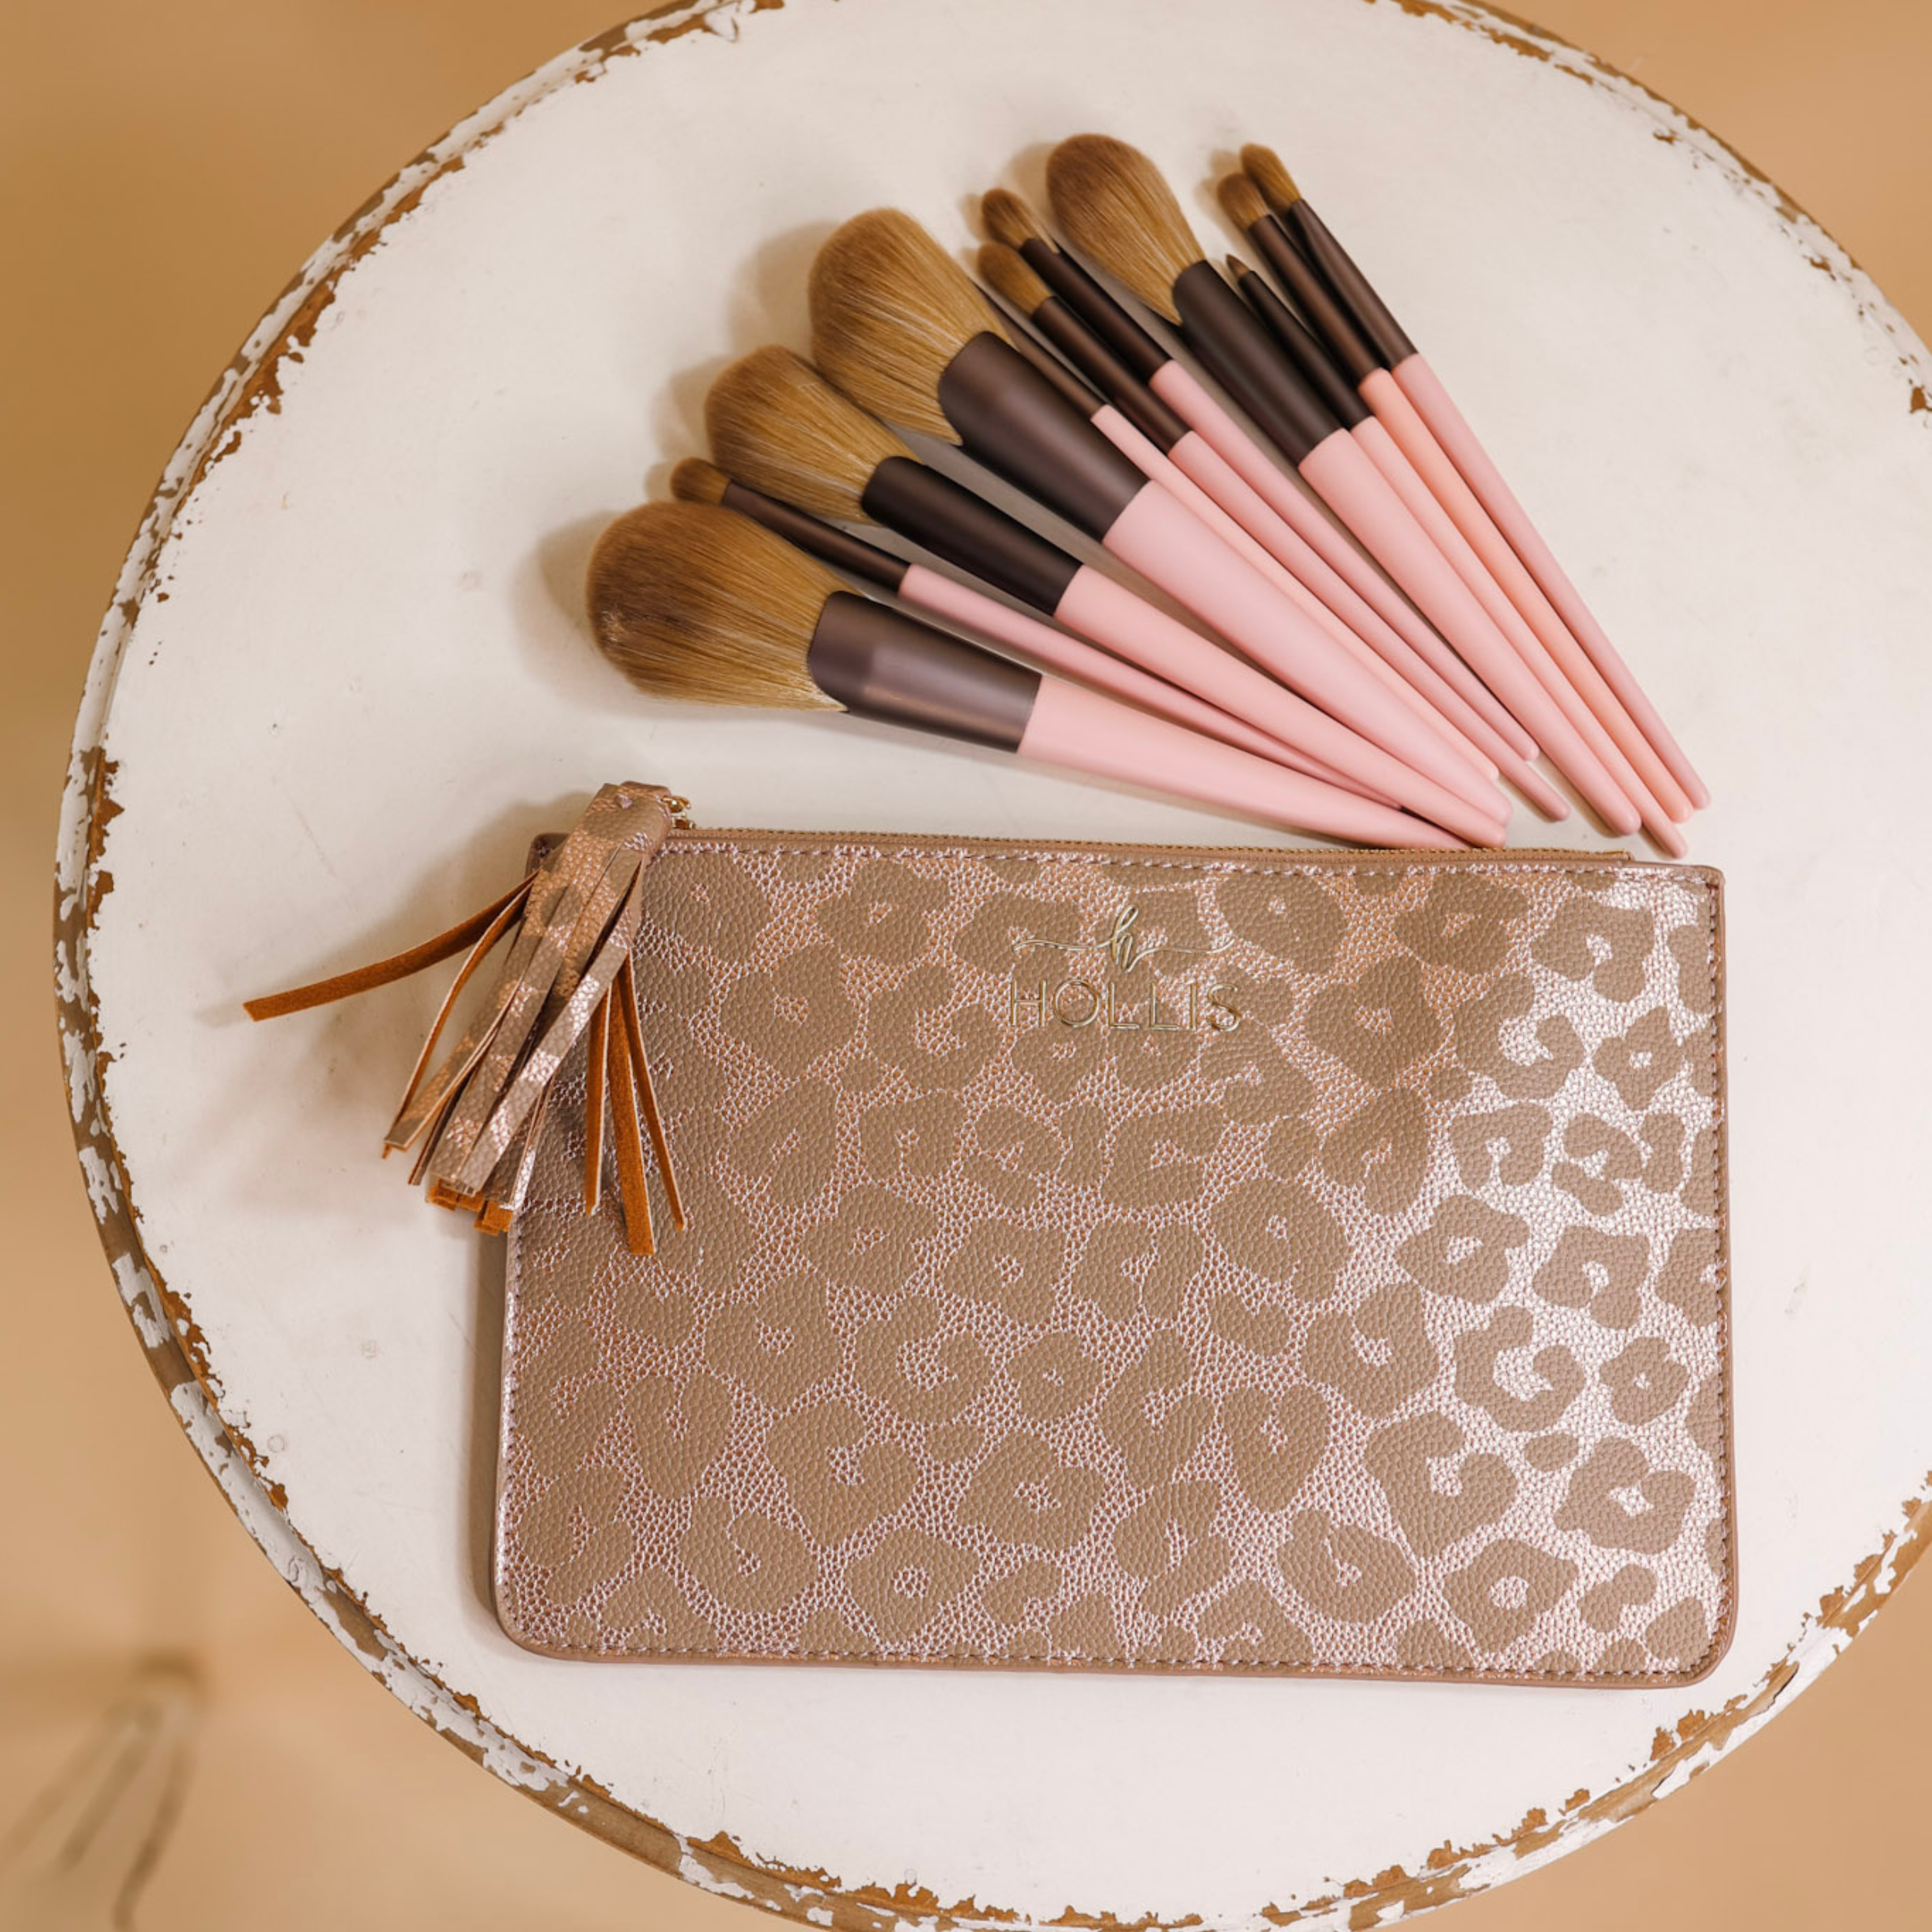 A leopard pouch is sitting in the middle of the picture with 11 different sized makeup brushes in pink and brown above the pouch. Background is white and tan. 